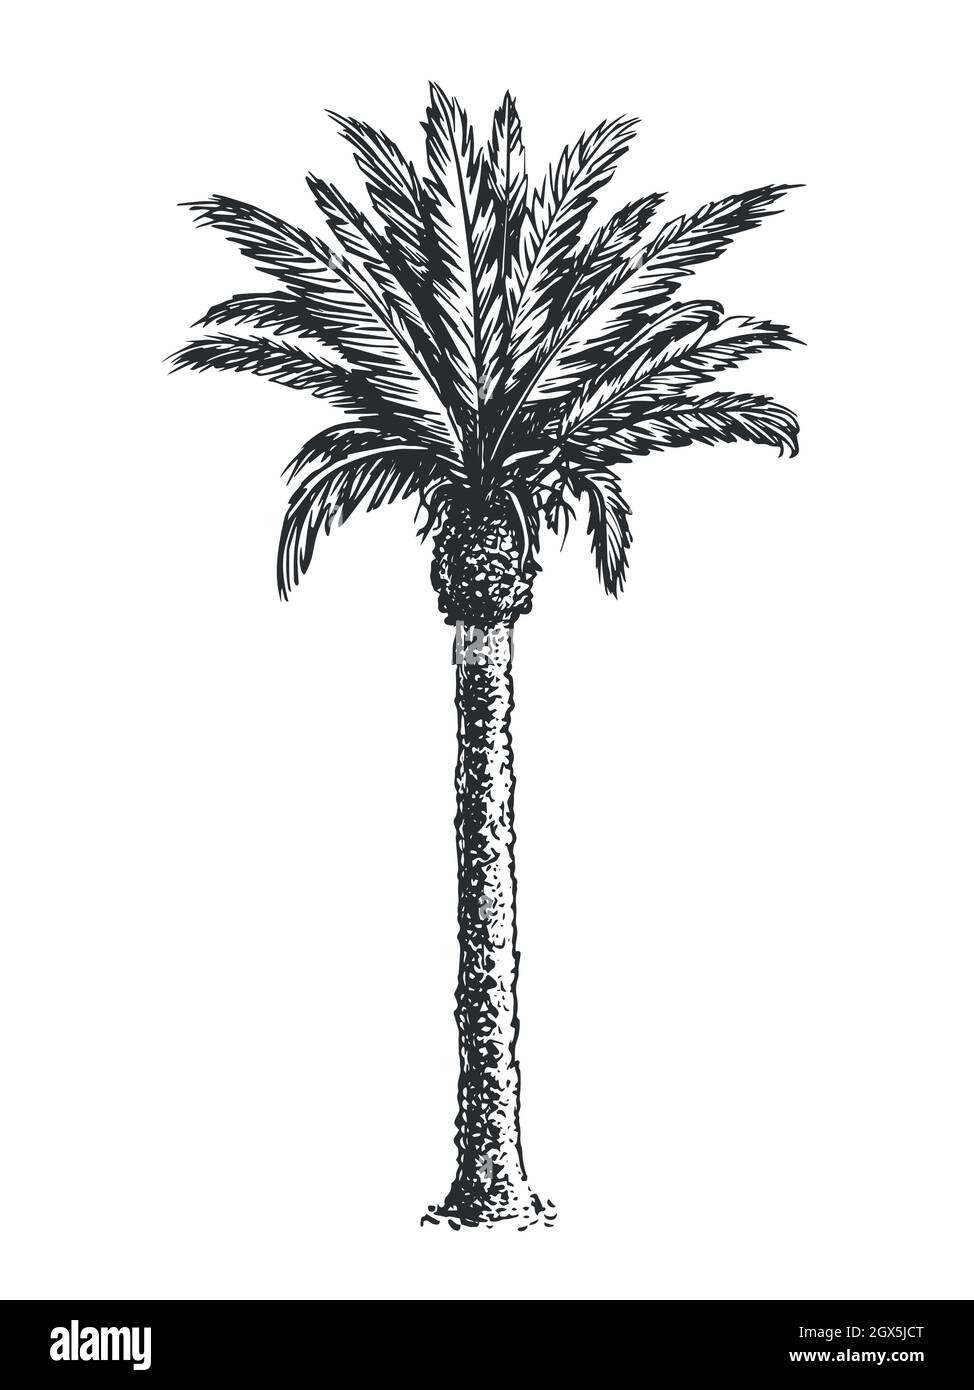 Sketch of palm tree isolated on white background. Hand drawn vector illustration Stock Vector